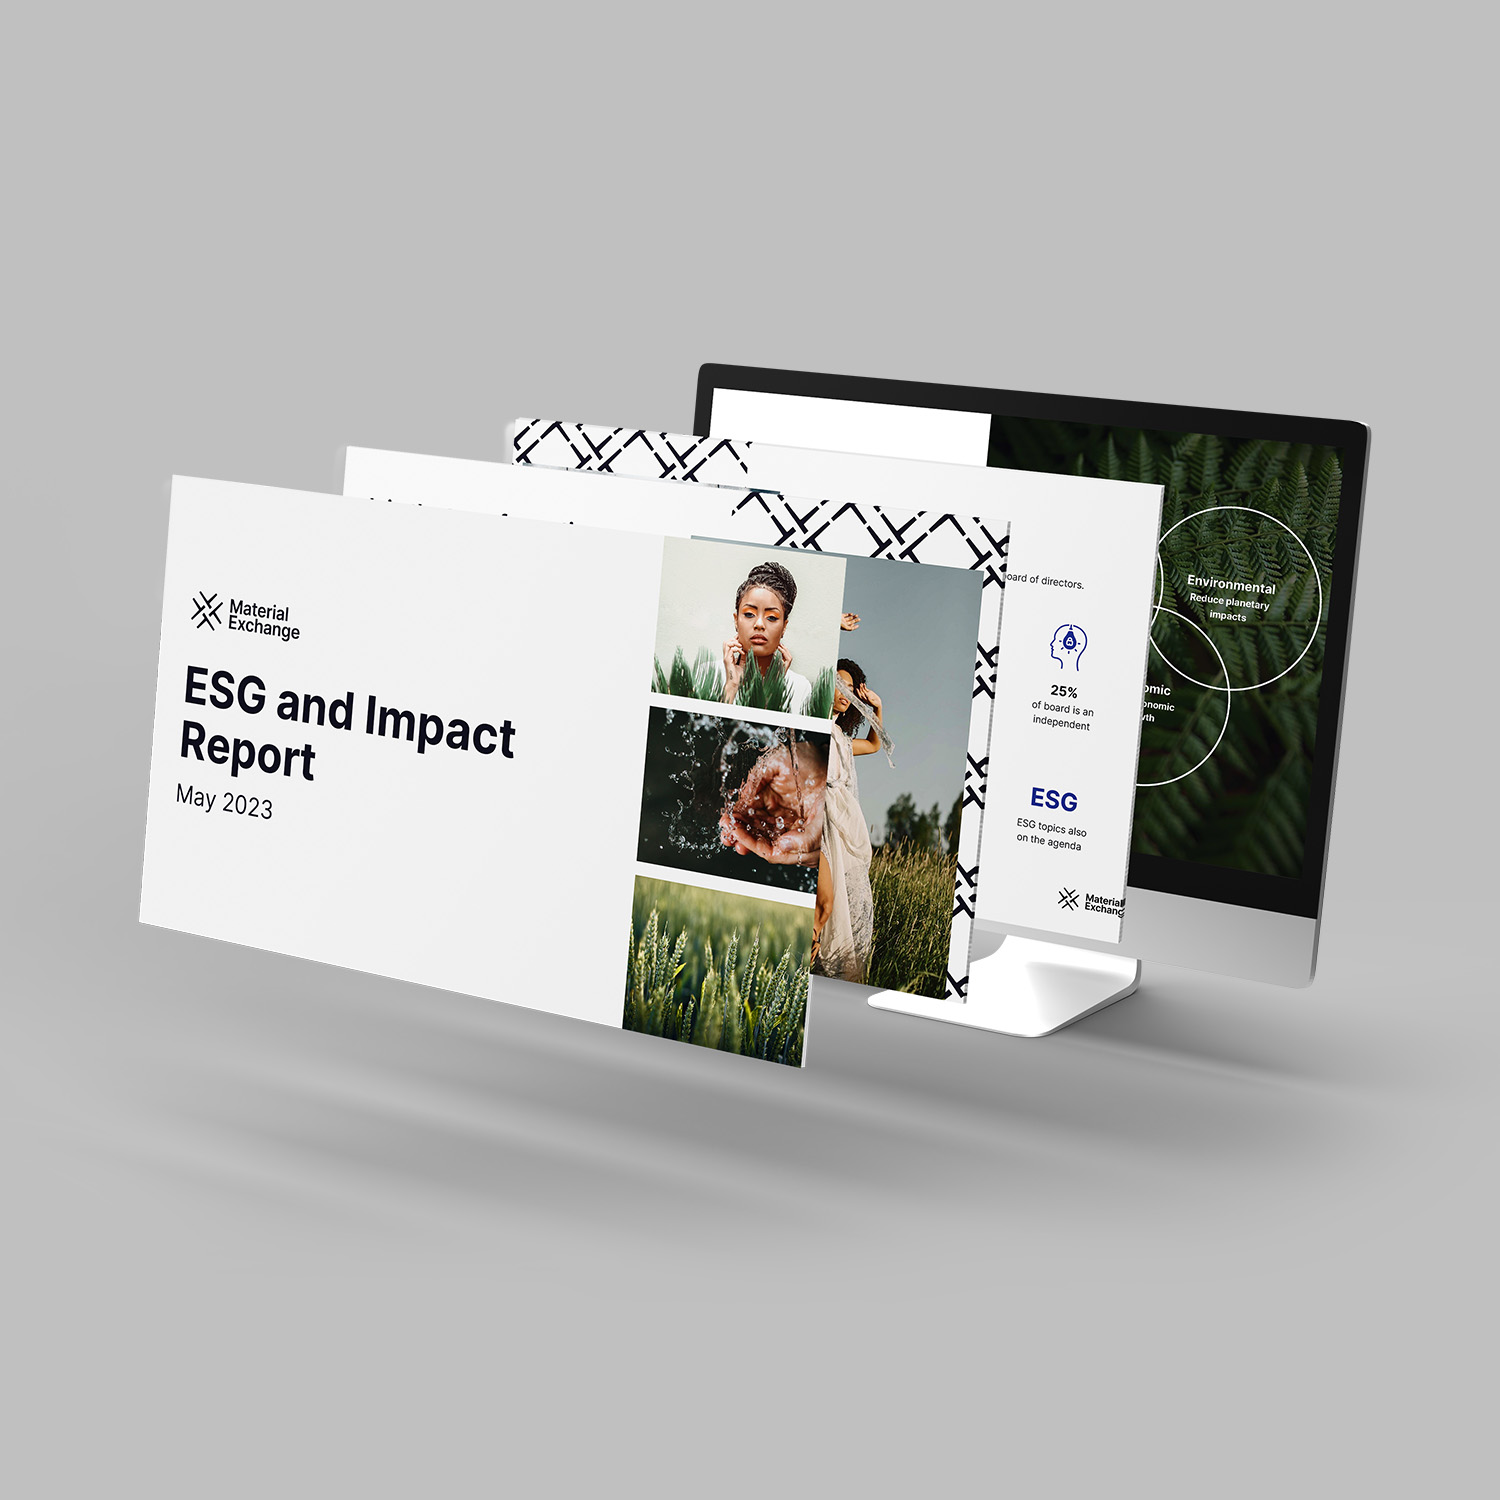 ESG and Impact Report